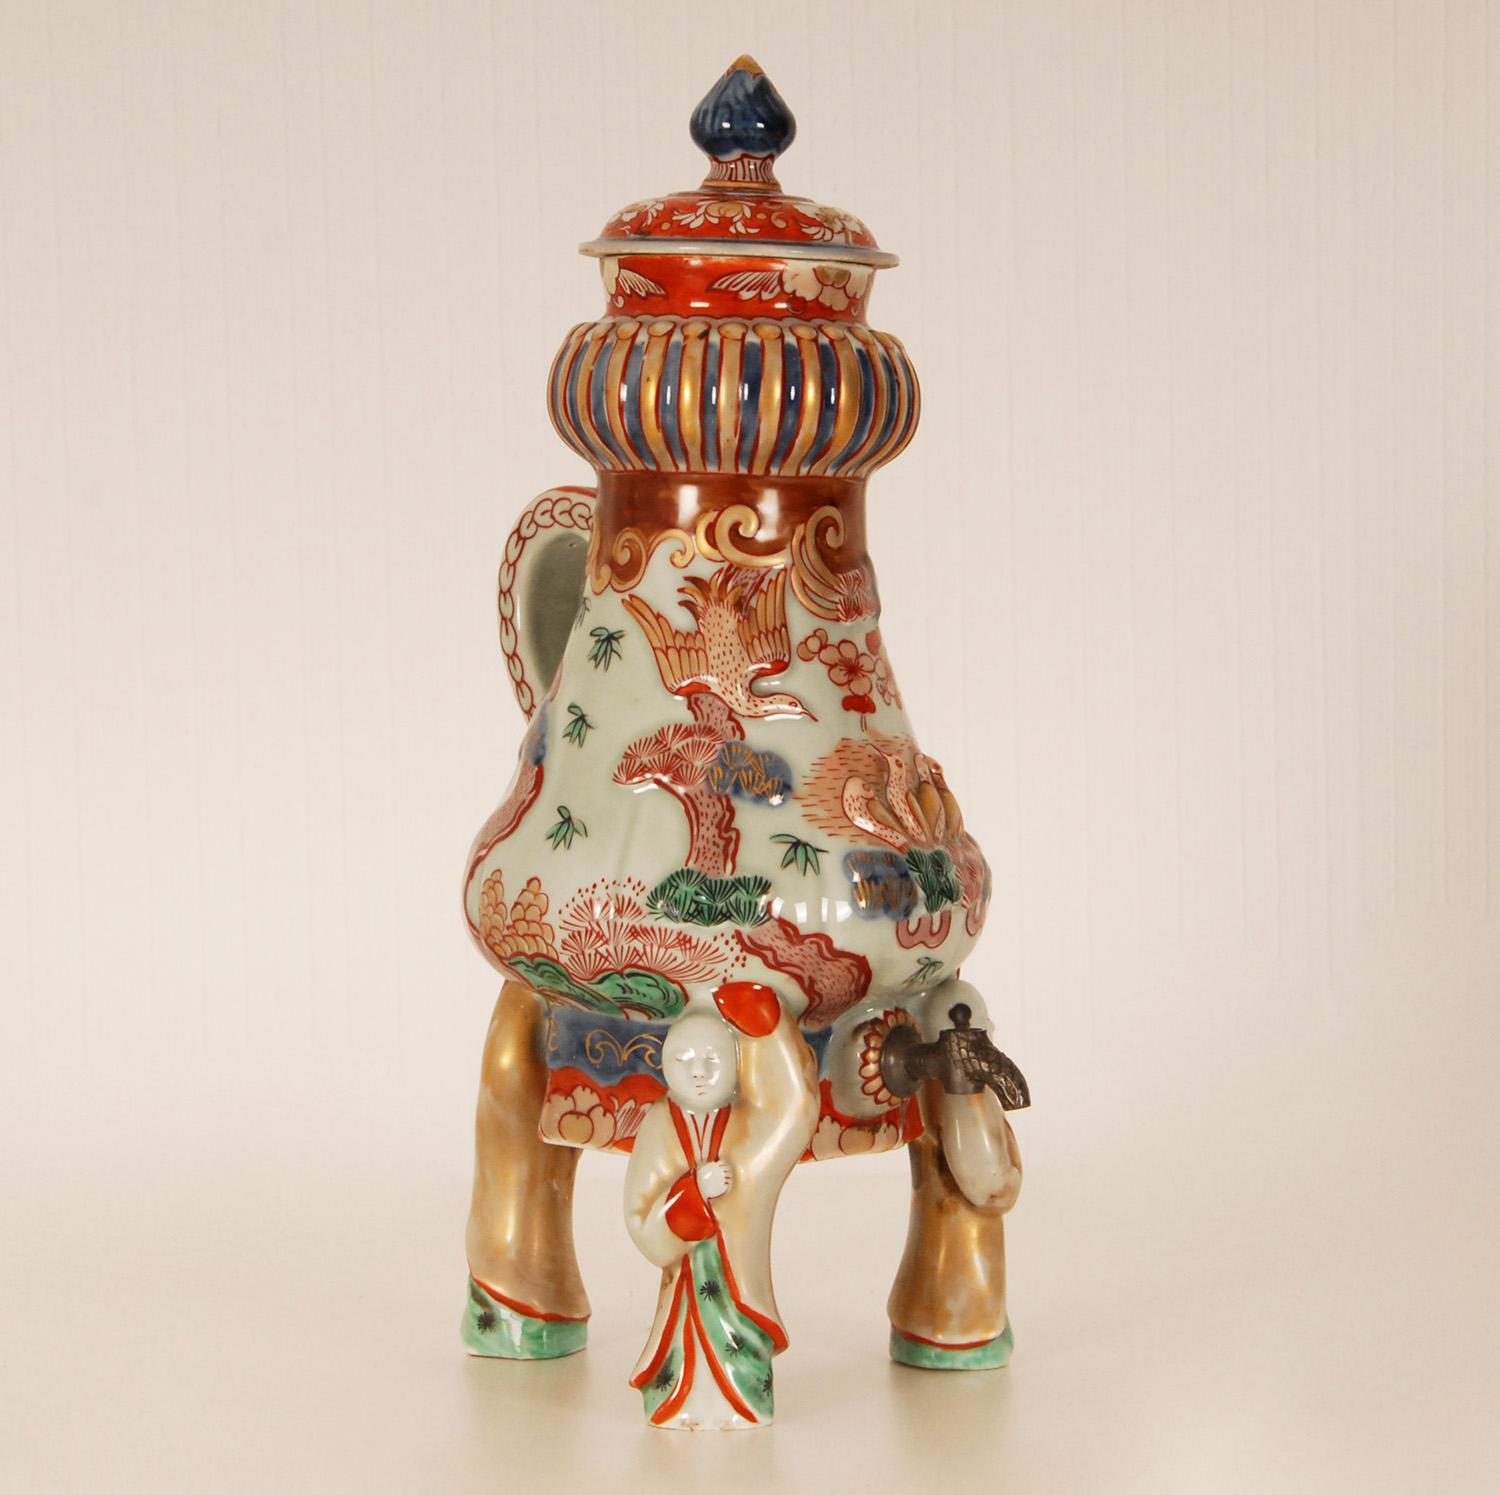 A fascinating Japanese coffee pot and collectors item by Samson Paris.
Material: Ceramic, porcelain
Style: Japanese, Oriental, Antique, Baroque
Origin: France, Paris late 19th century
Mark: beneath the pot (see picture)
Technique hand painted and